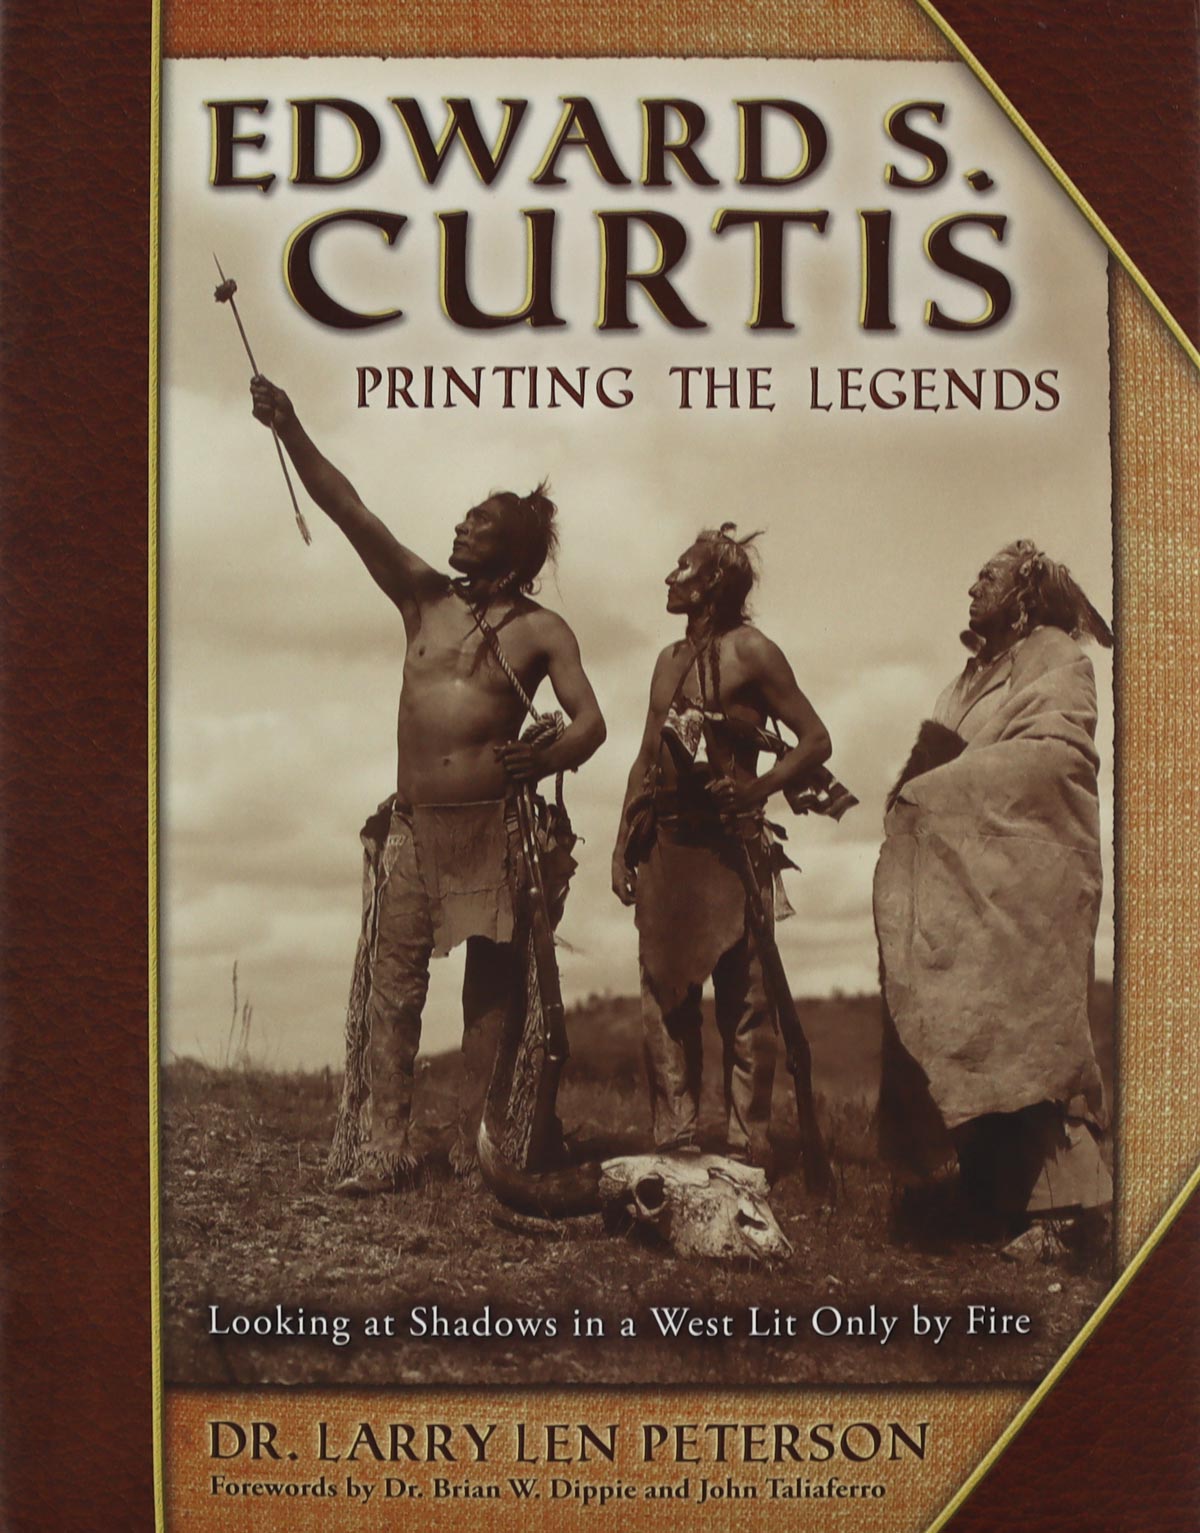 Edward S. Curtis, Printing the Legends: Looking at Shadows in a West Lit Only by Fire by Dr. Larry Len Peterson